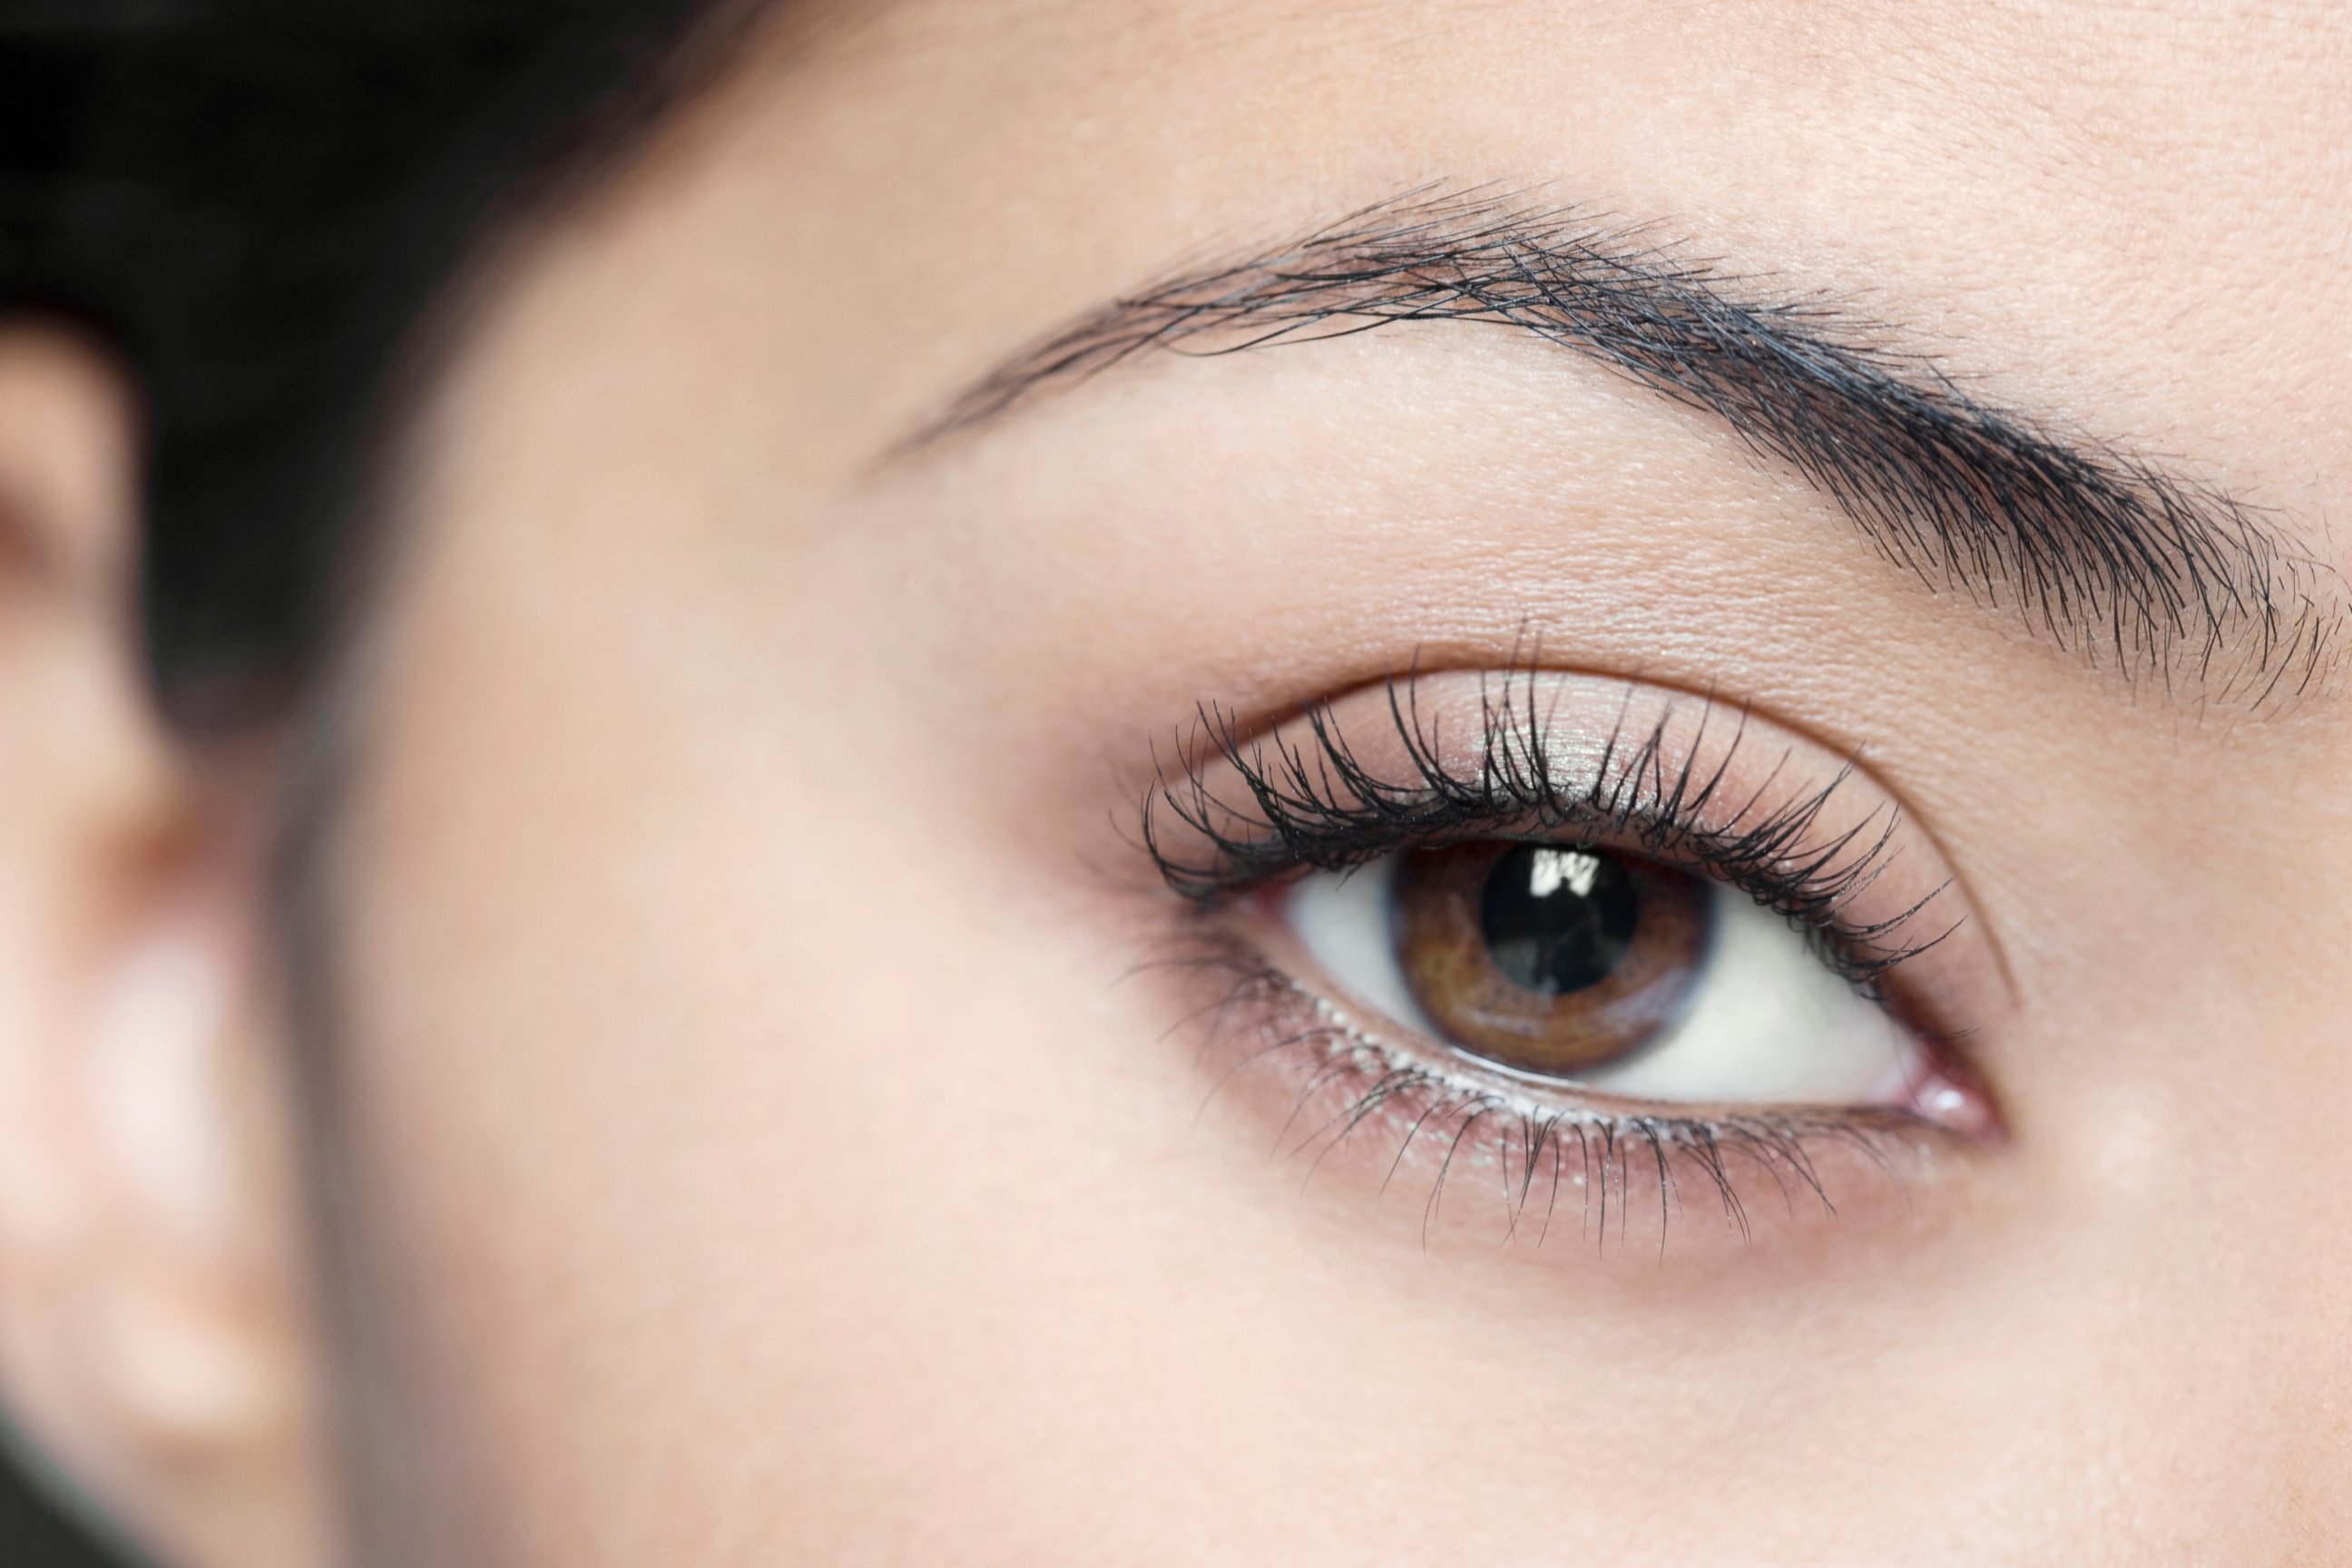 PHOTO: In this stock image, a closeup of a woman's eyebrow is pictured. 